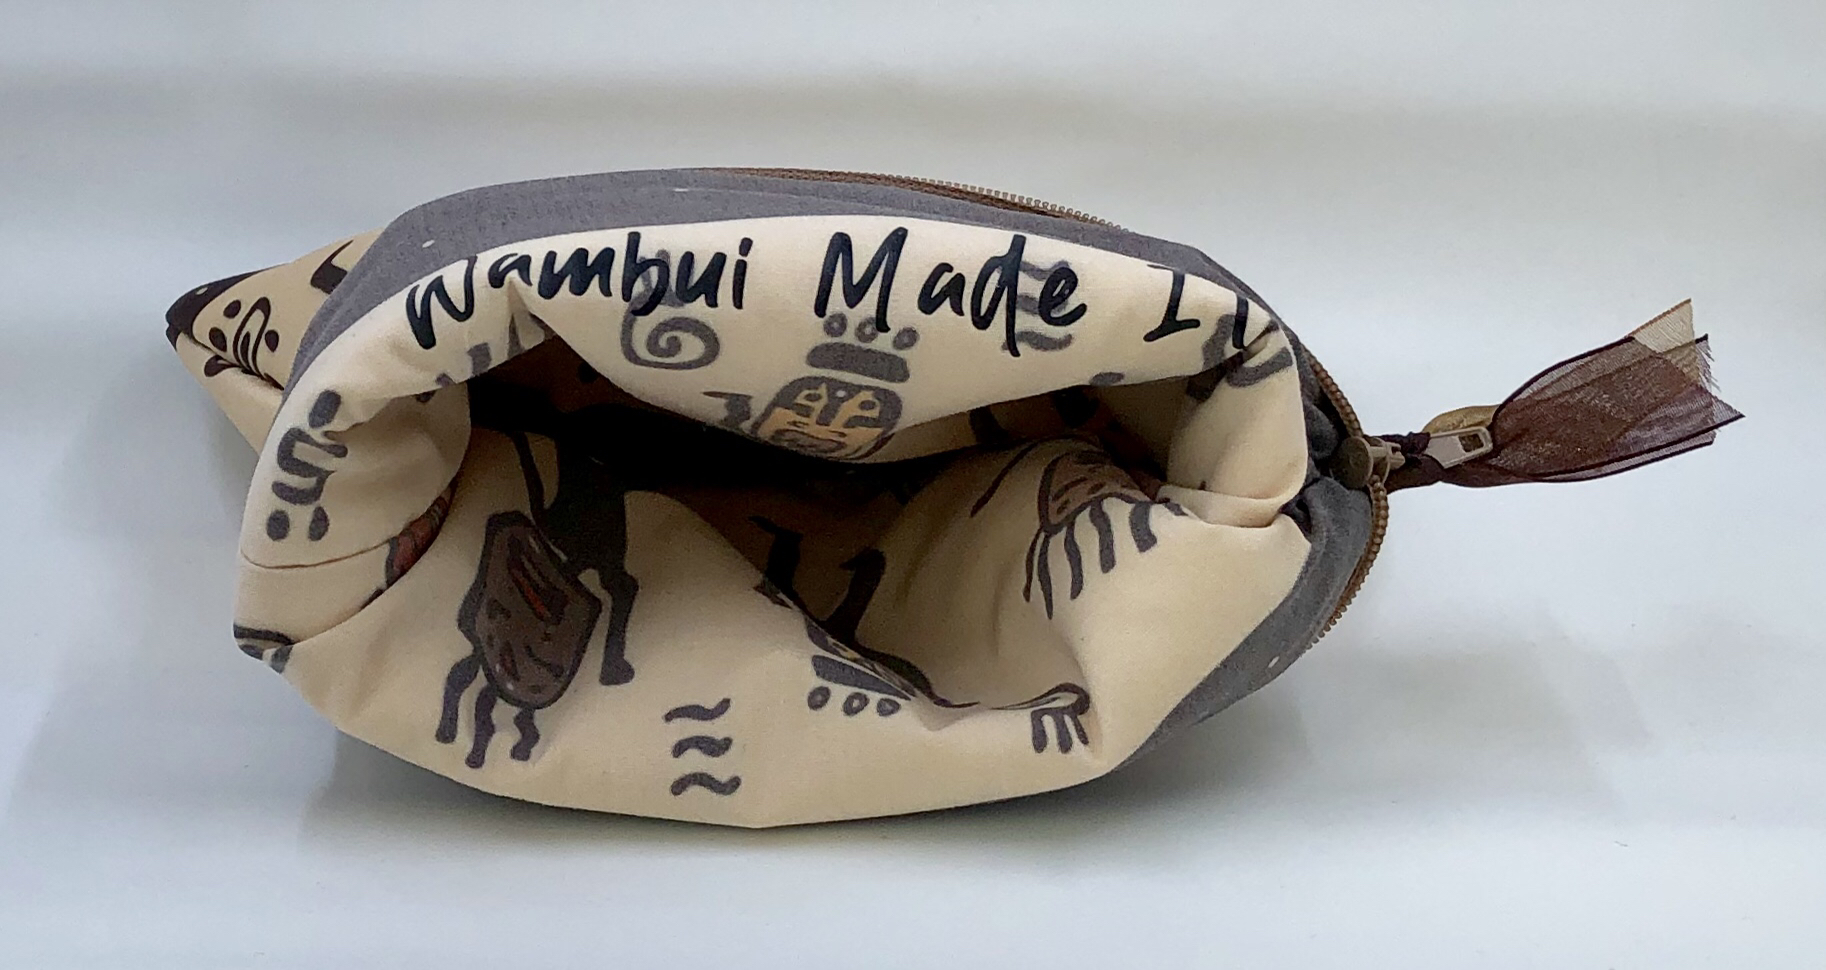 from 'Wambui Made It' Pouch Collection